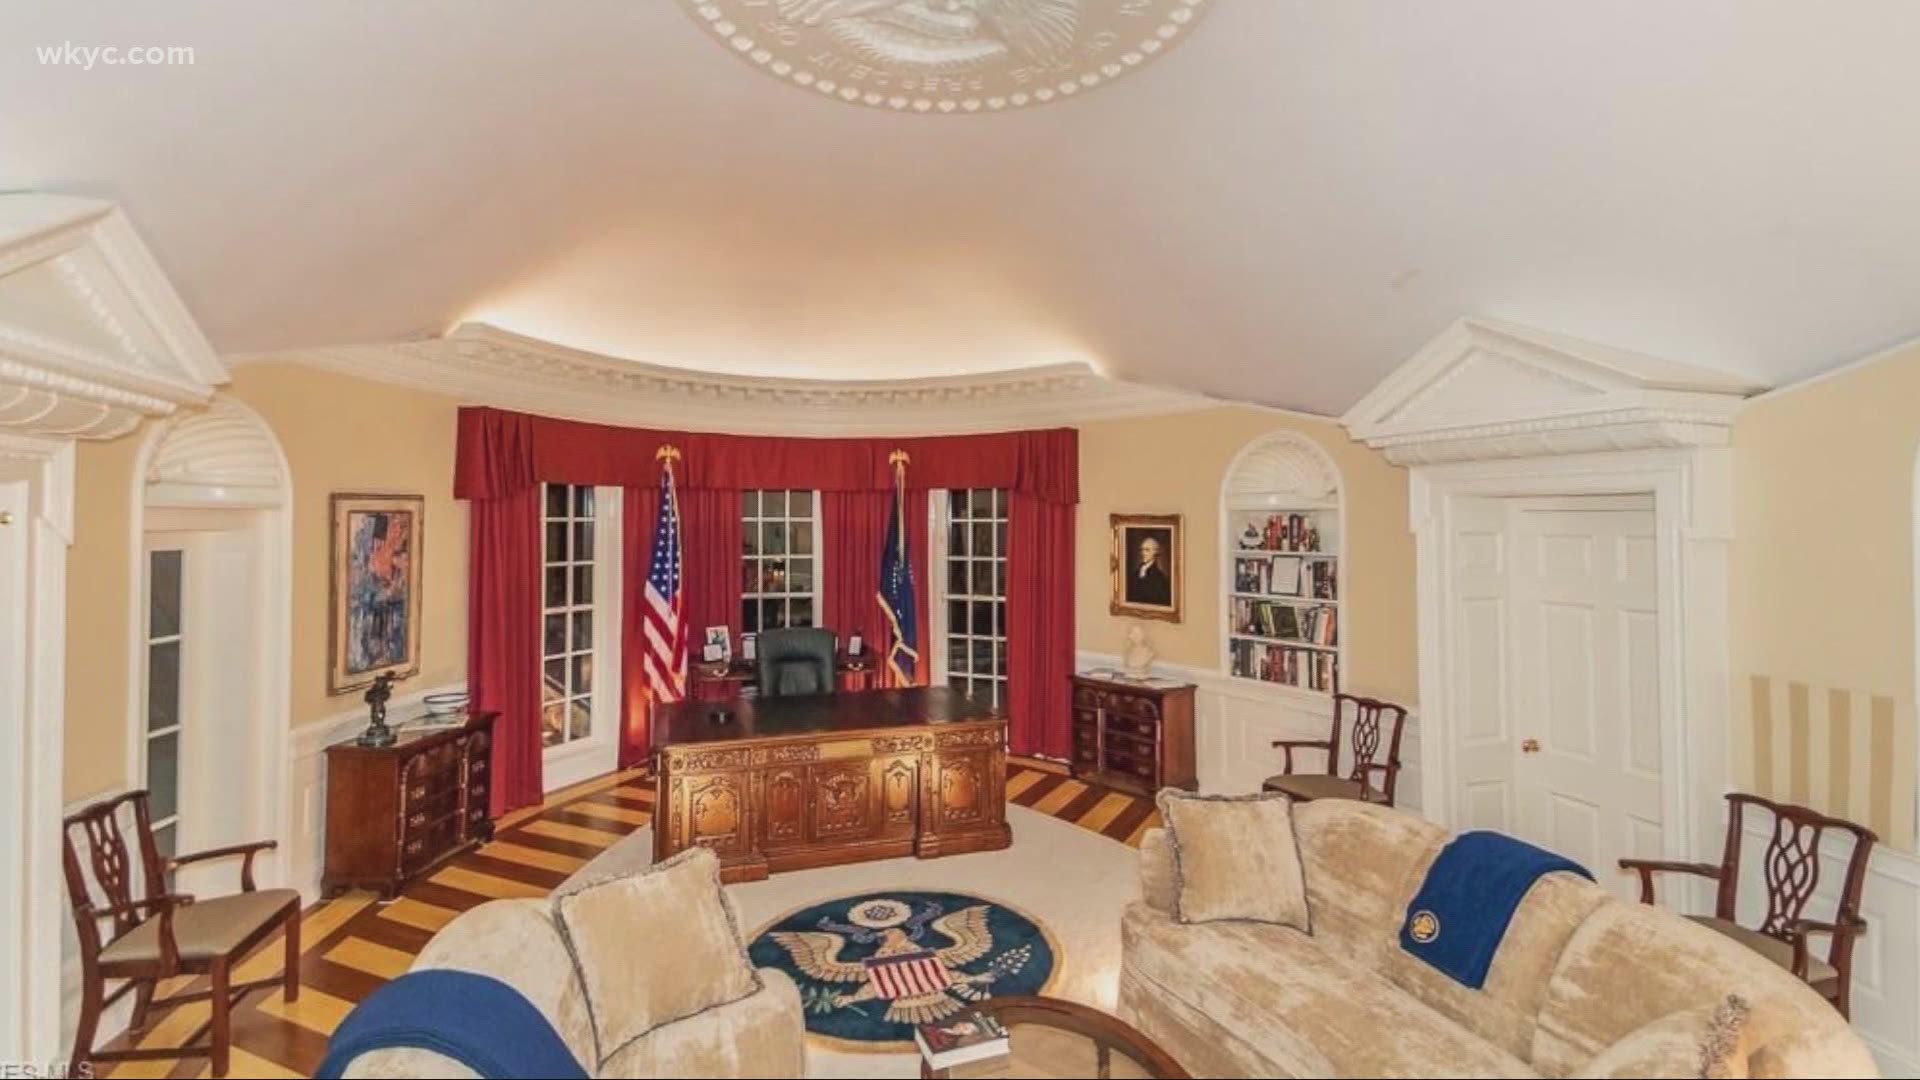 There's a beautiful home for sale in Kirtland Hills, located on Sanctuary Drive.The real GEM in this house, is the exact replica of the Oval Office.